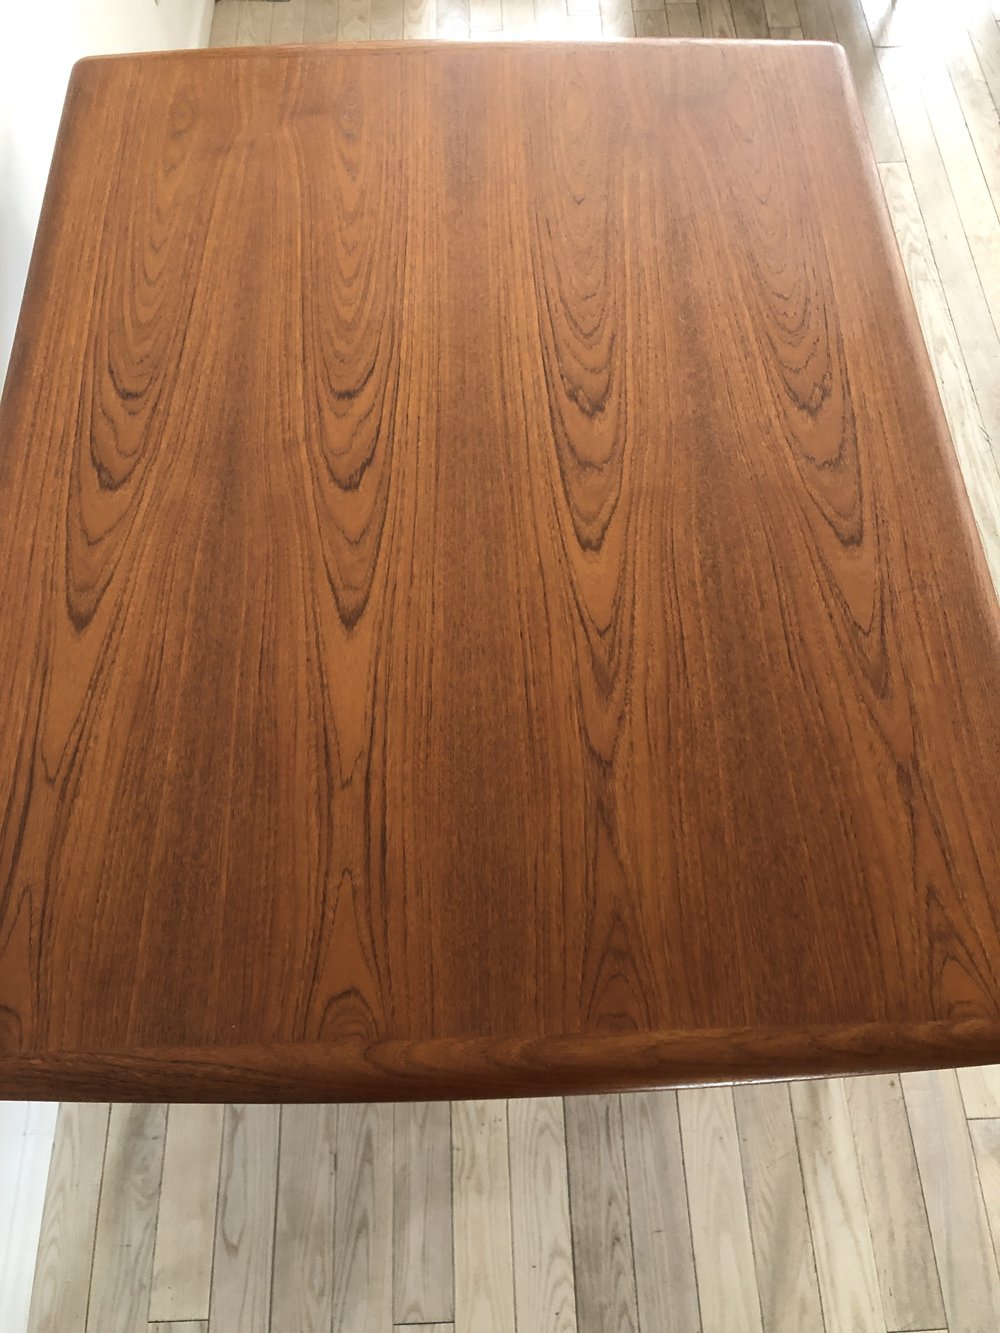 Mid Century Danish Teak Expandable Dining Table by Svend Madsen